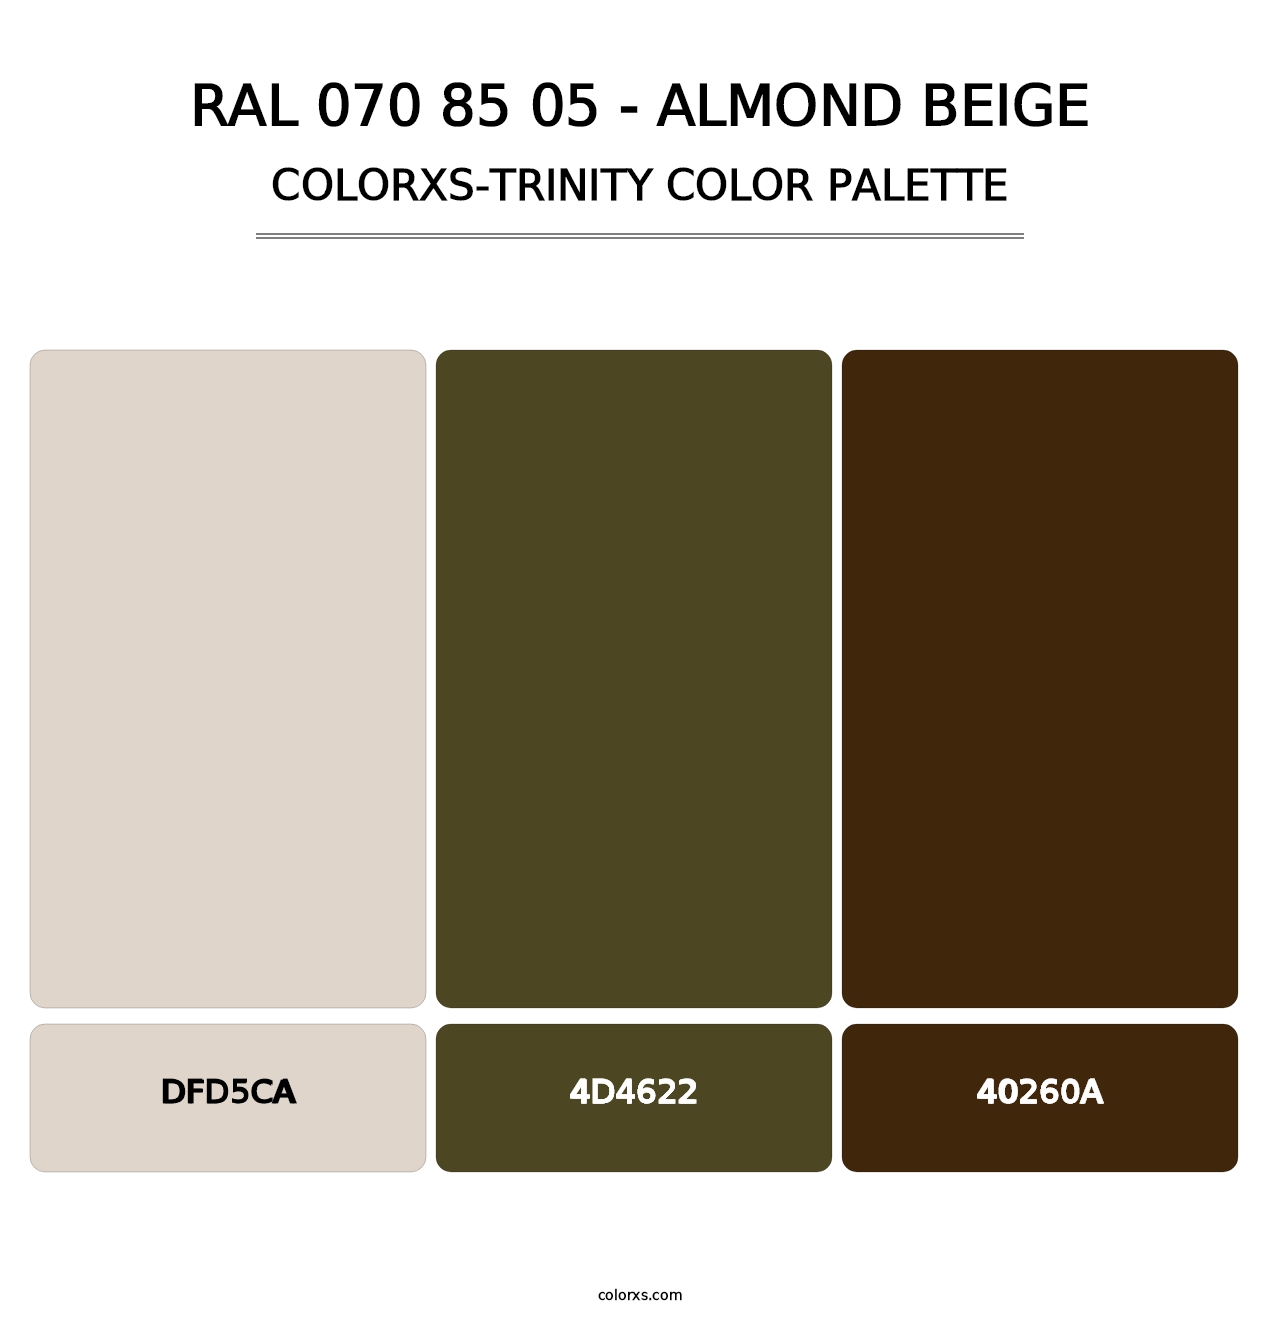 RAL 070 85 05 - Almond Beige - Colorxs Trinity Palette